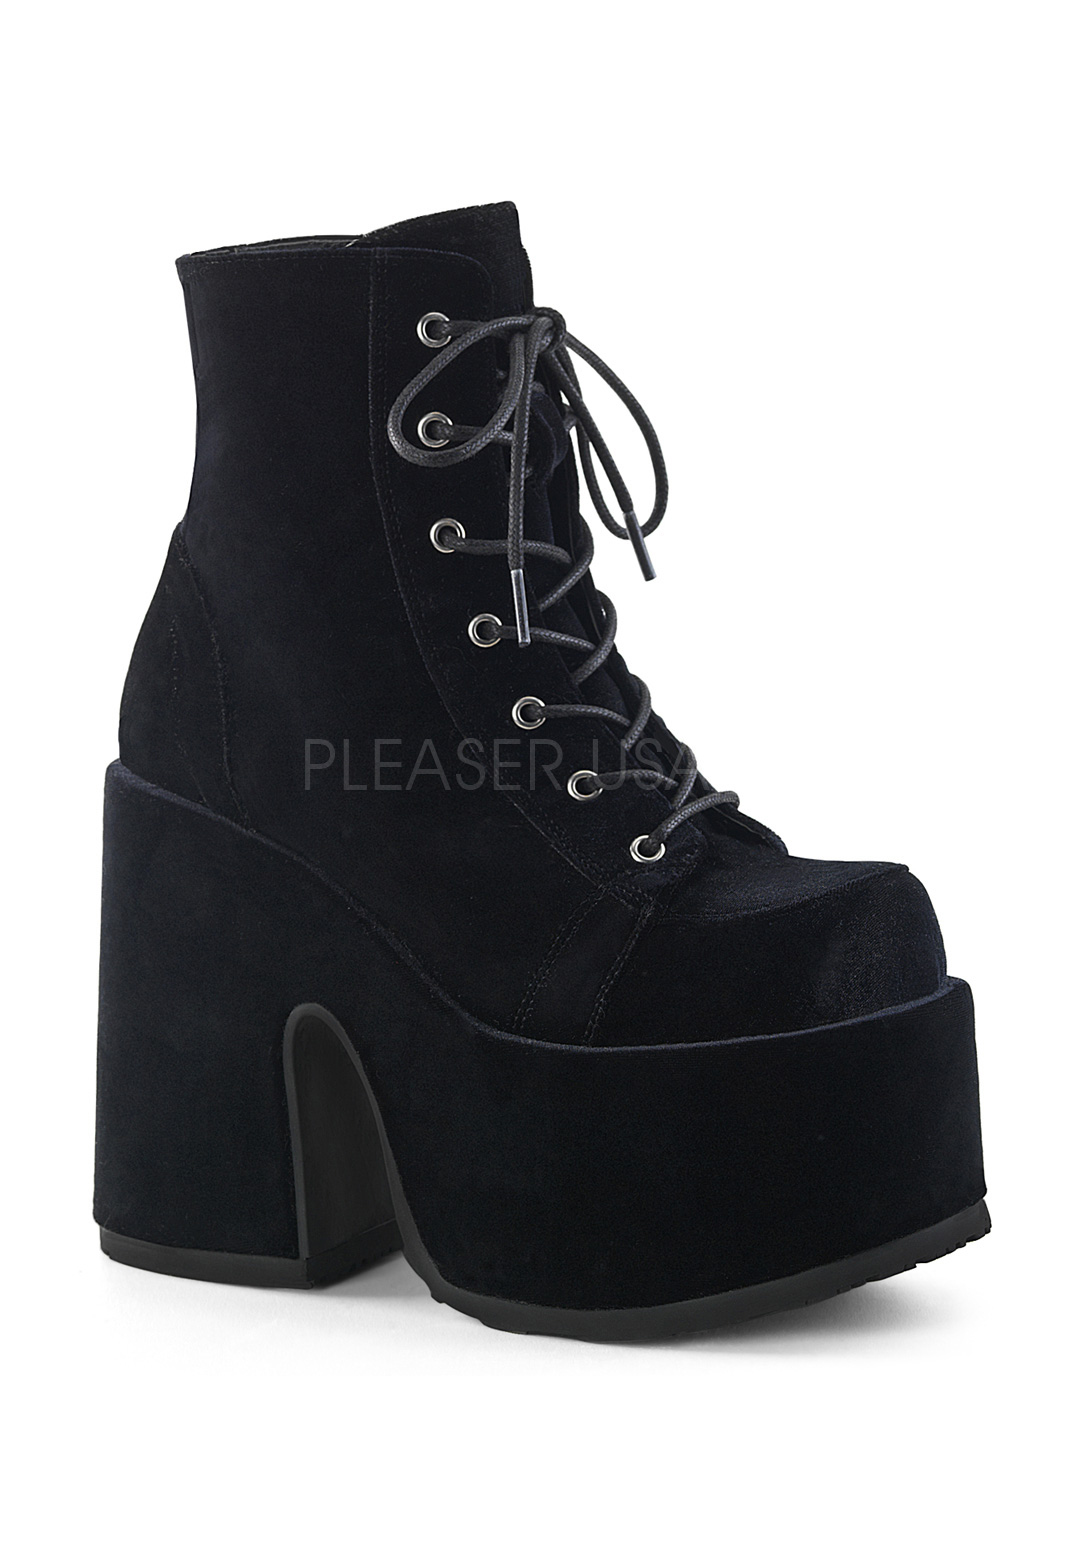 12 inch platform boots,Save up to 17%,www.ilcascinone.com